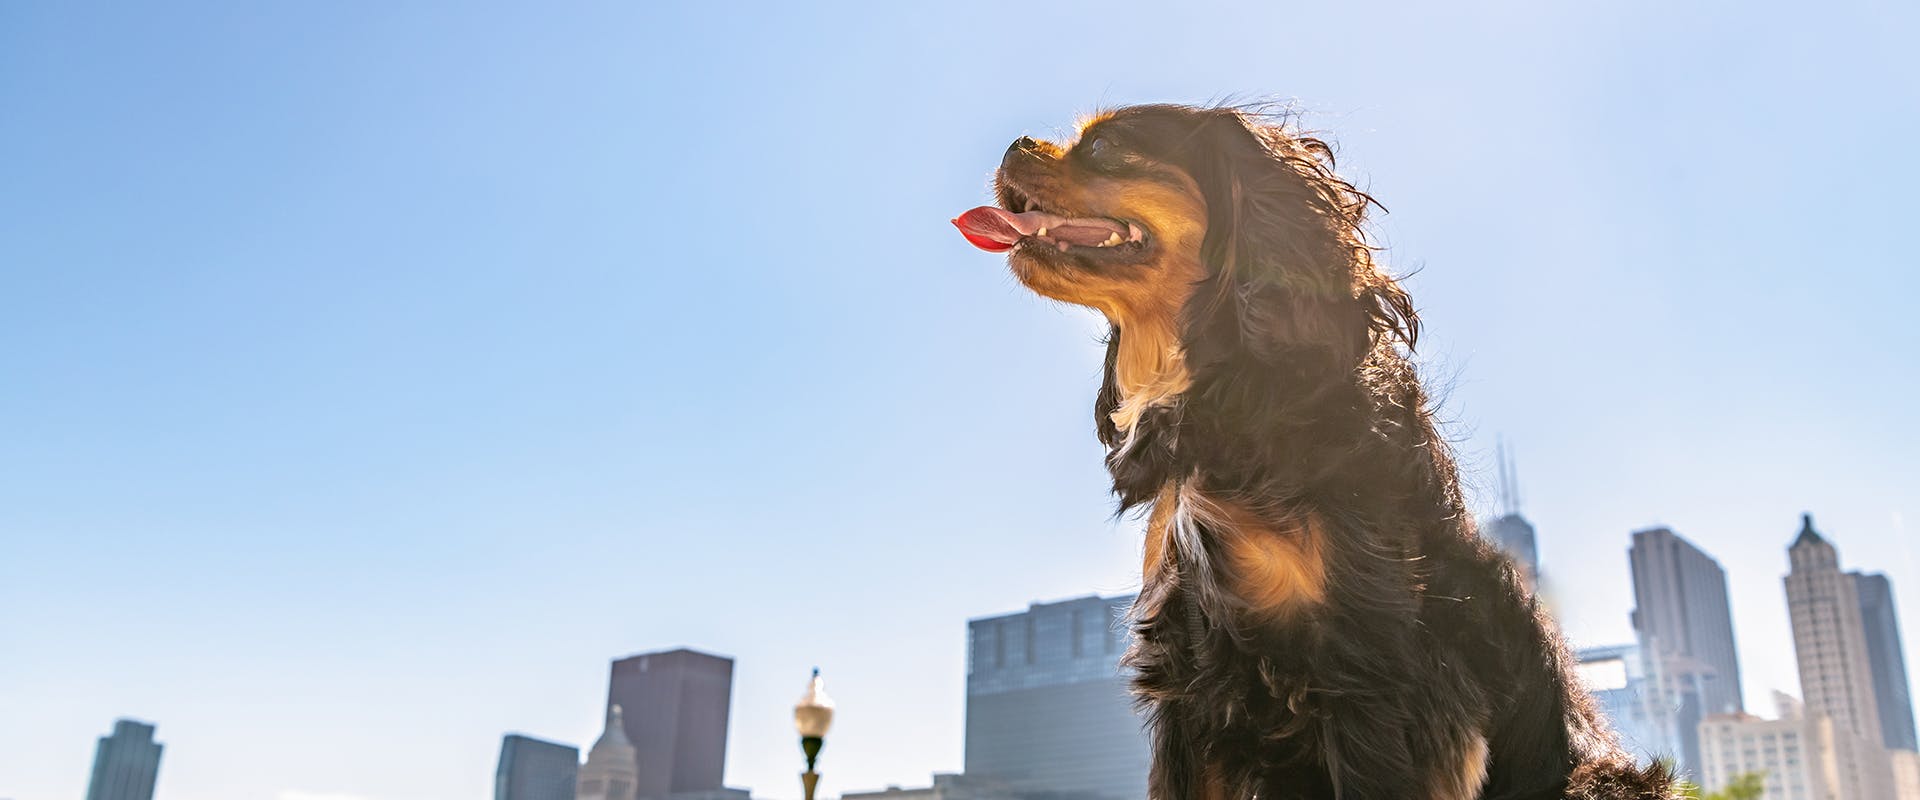 A regal looking dog standing in the sun, photographed from below